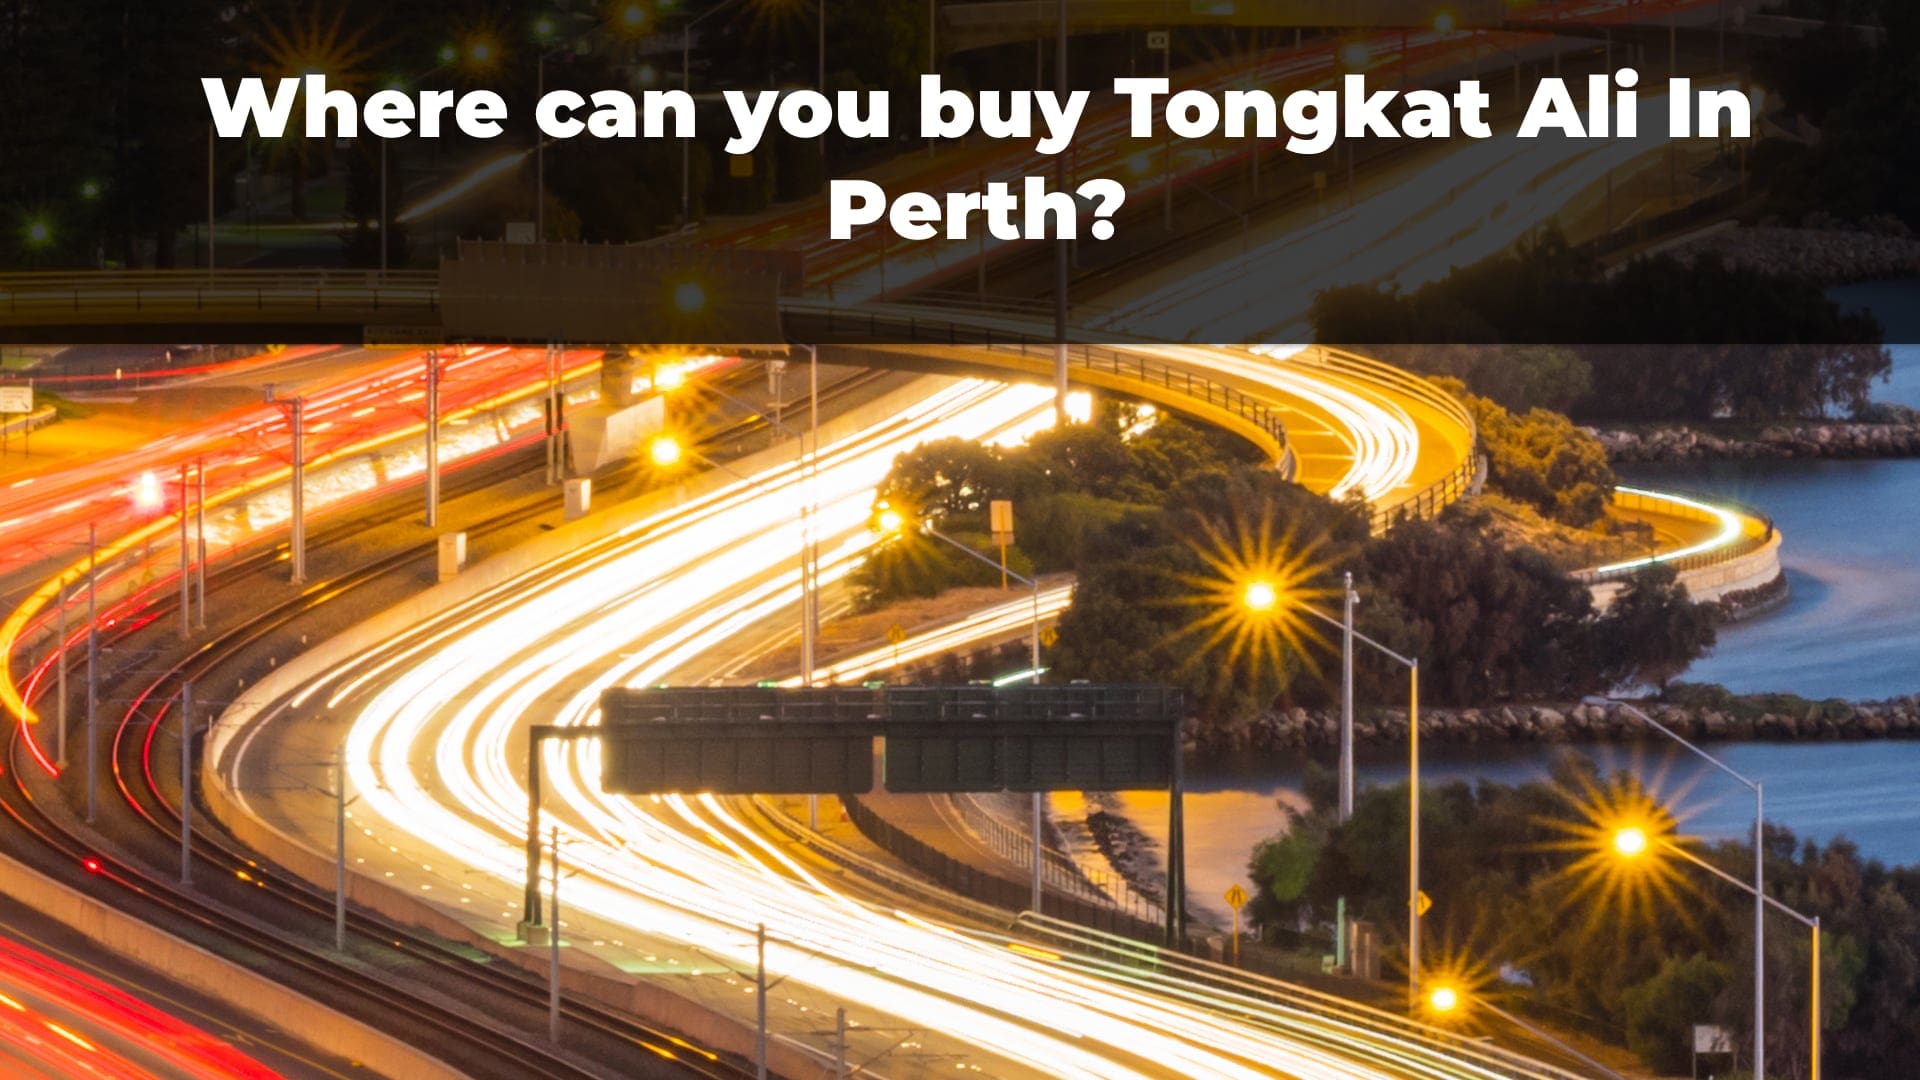 Article Cover For Where can you buy Tongkat Ali In Perth Depicts The Evening Trafic In Perth City Center